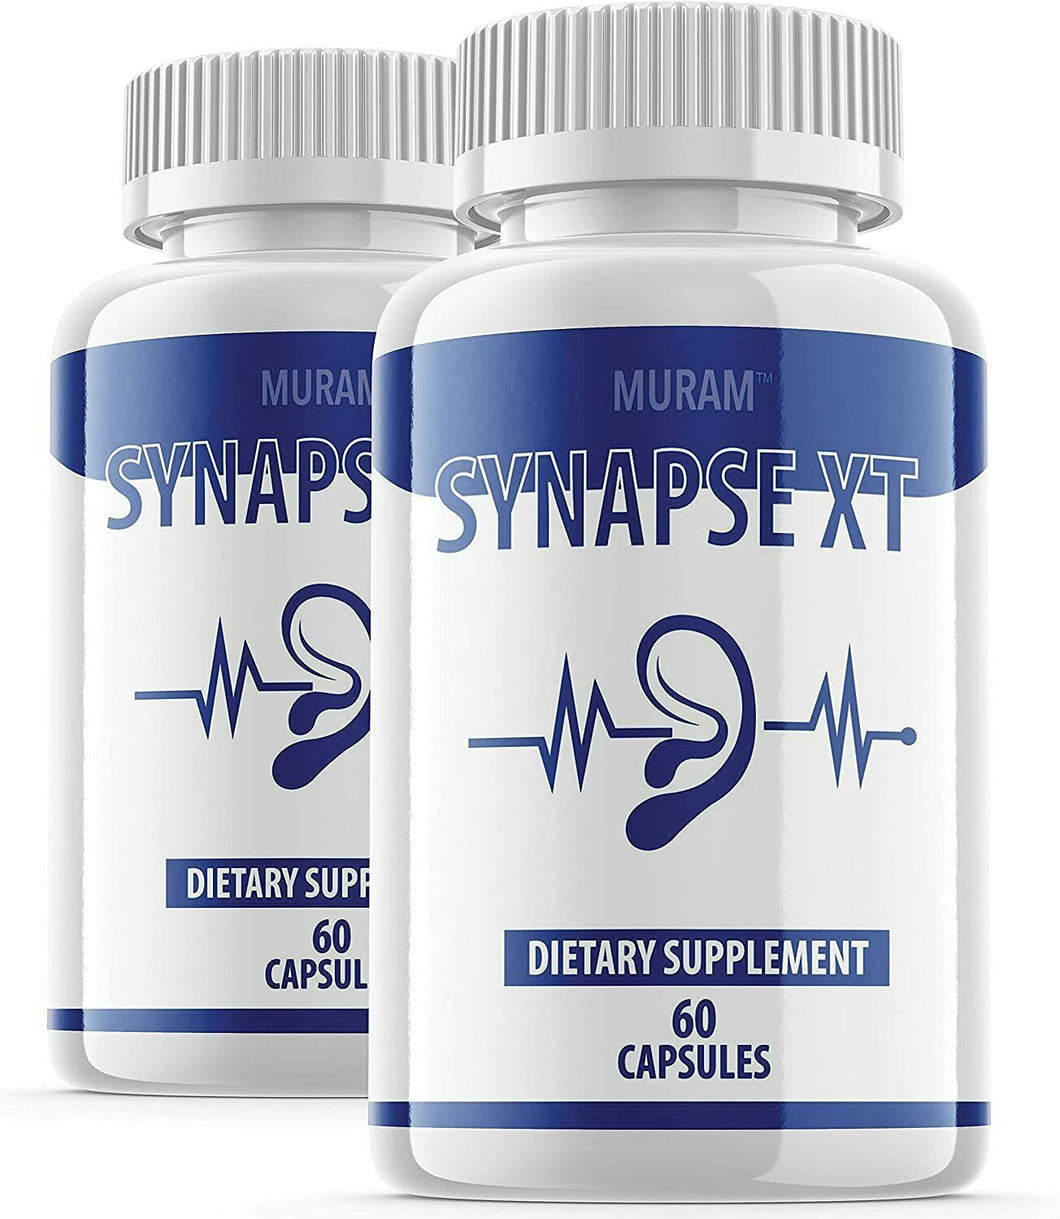 2 x Synapse XT Advanced Supplement Pills for Tinnitus Support Ear Health 60 caps